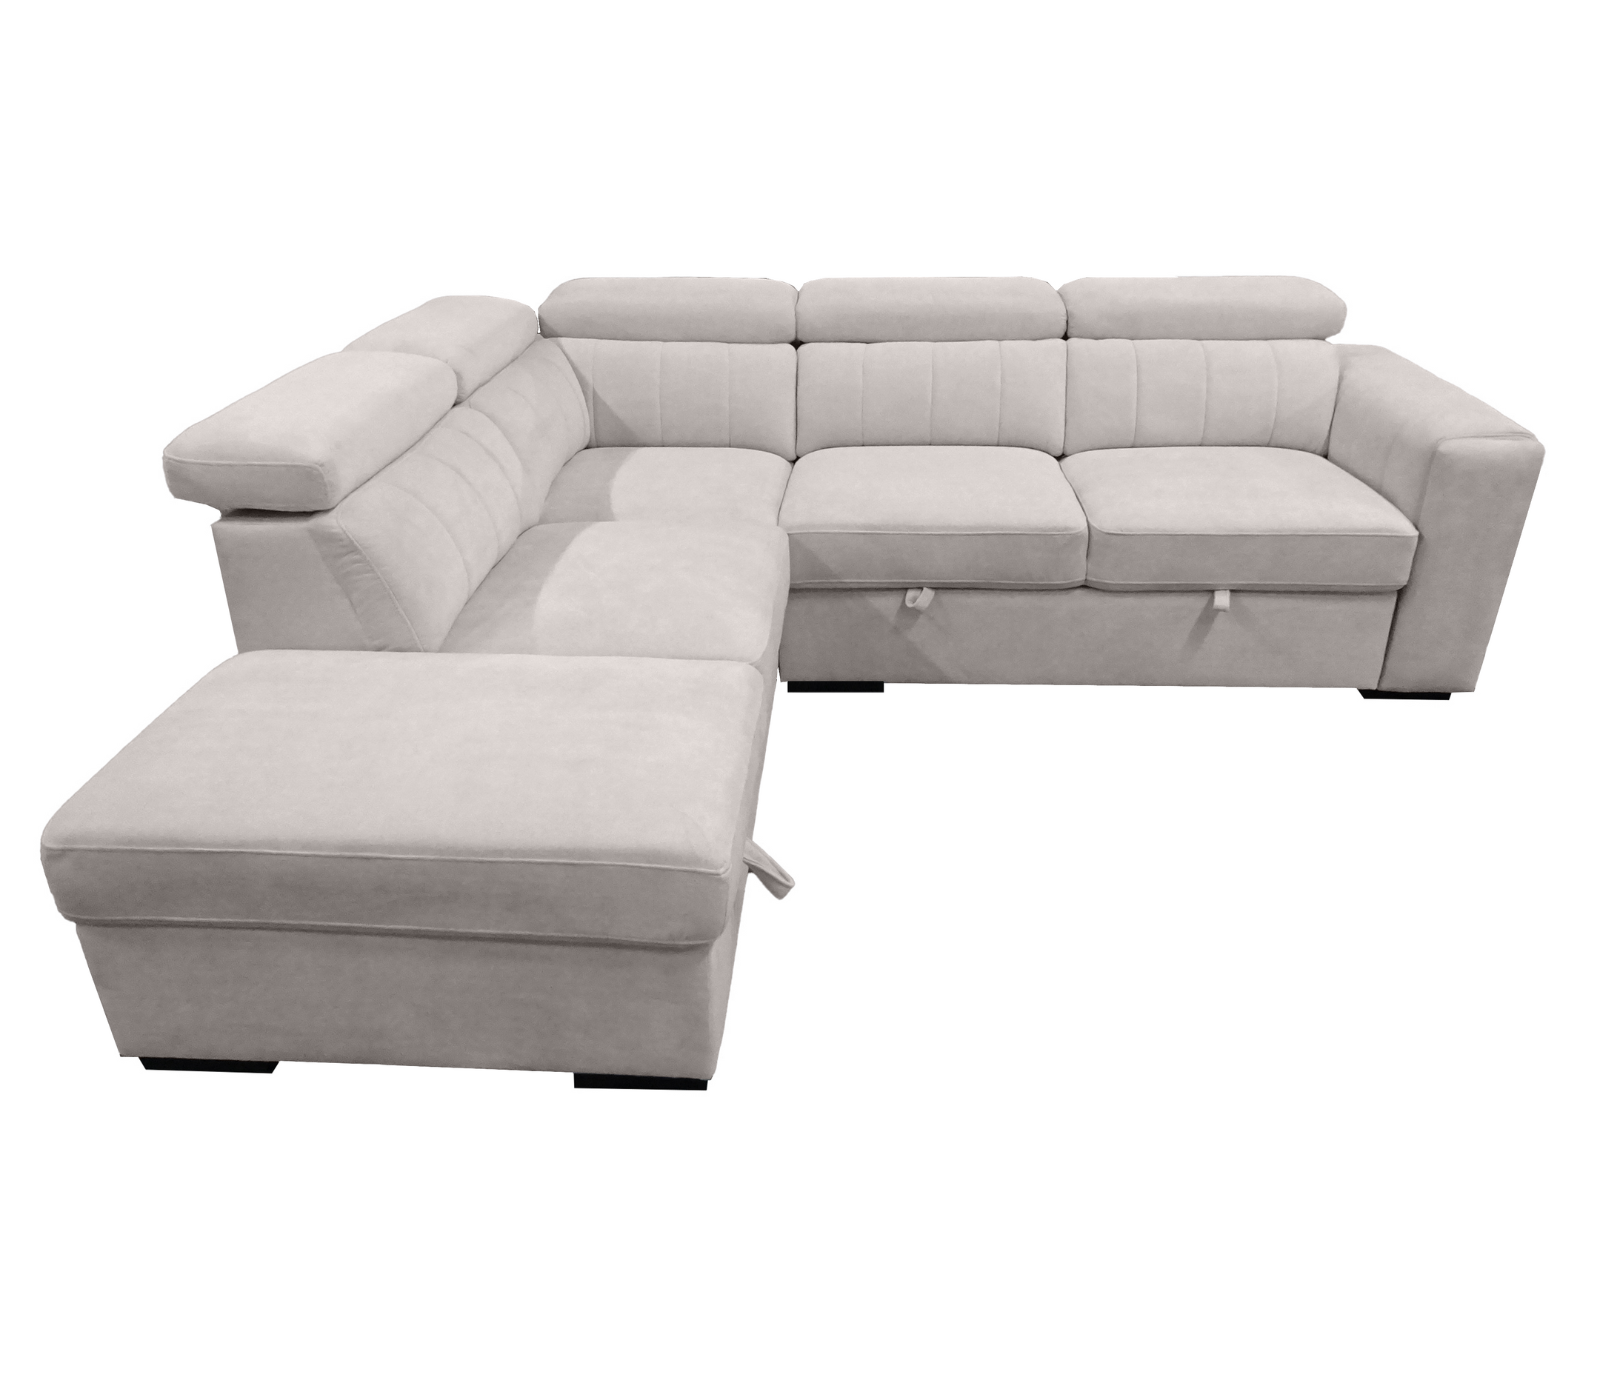 Nelly 2 Piece Sectional w/ Pull-Out Sleeper - Cream Fabric